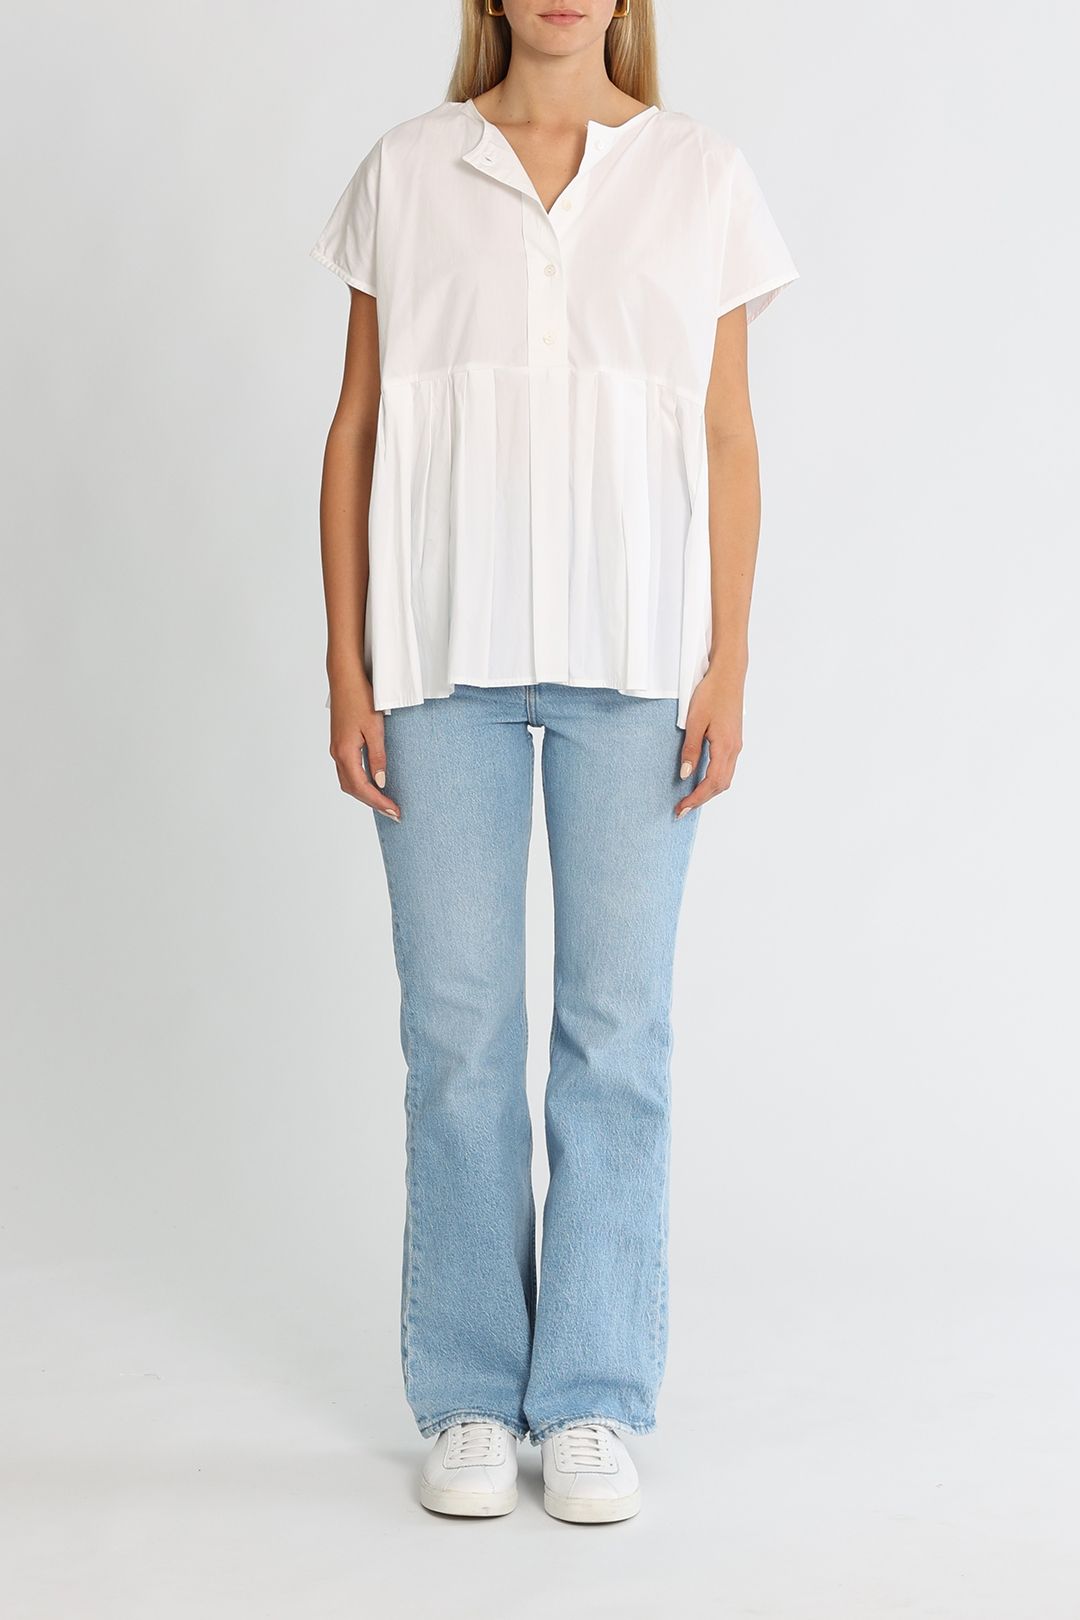 Kowtow Form Short Sleeve Top White